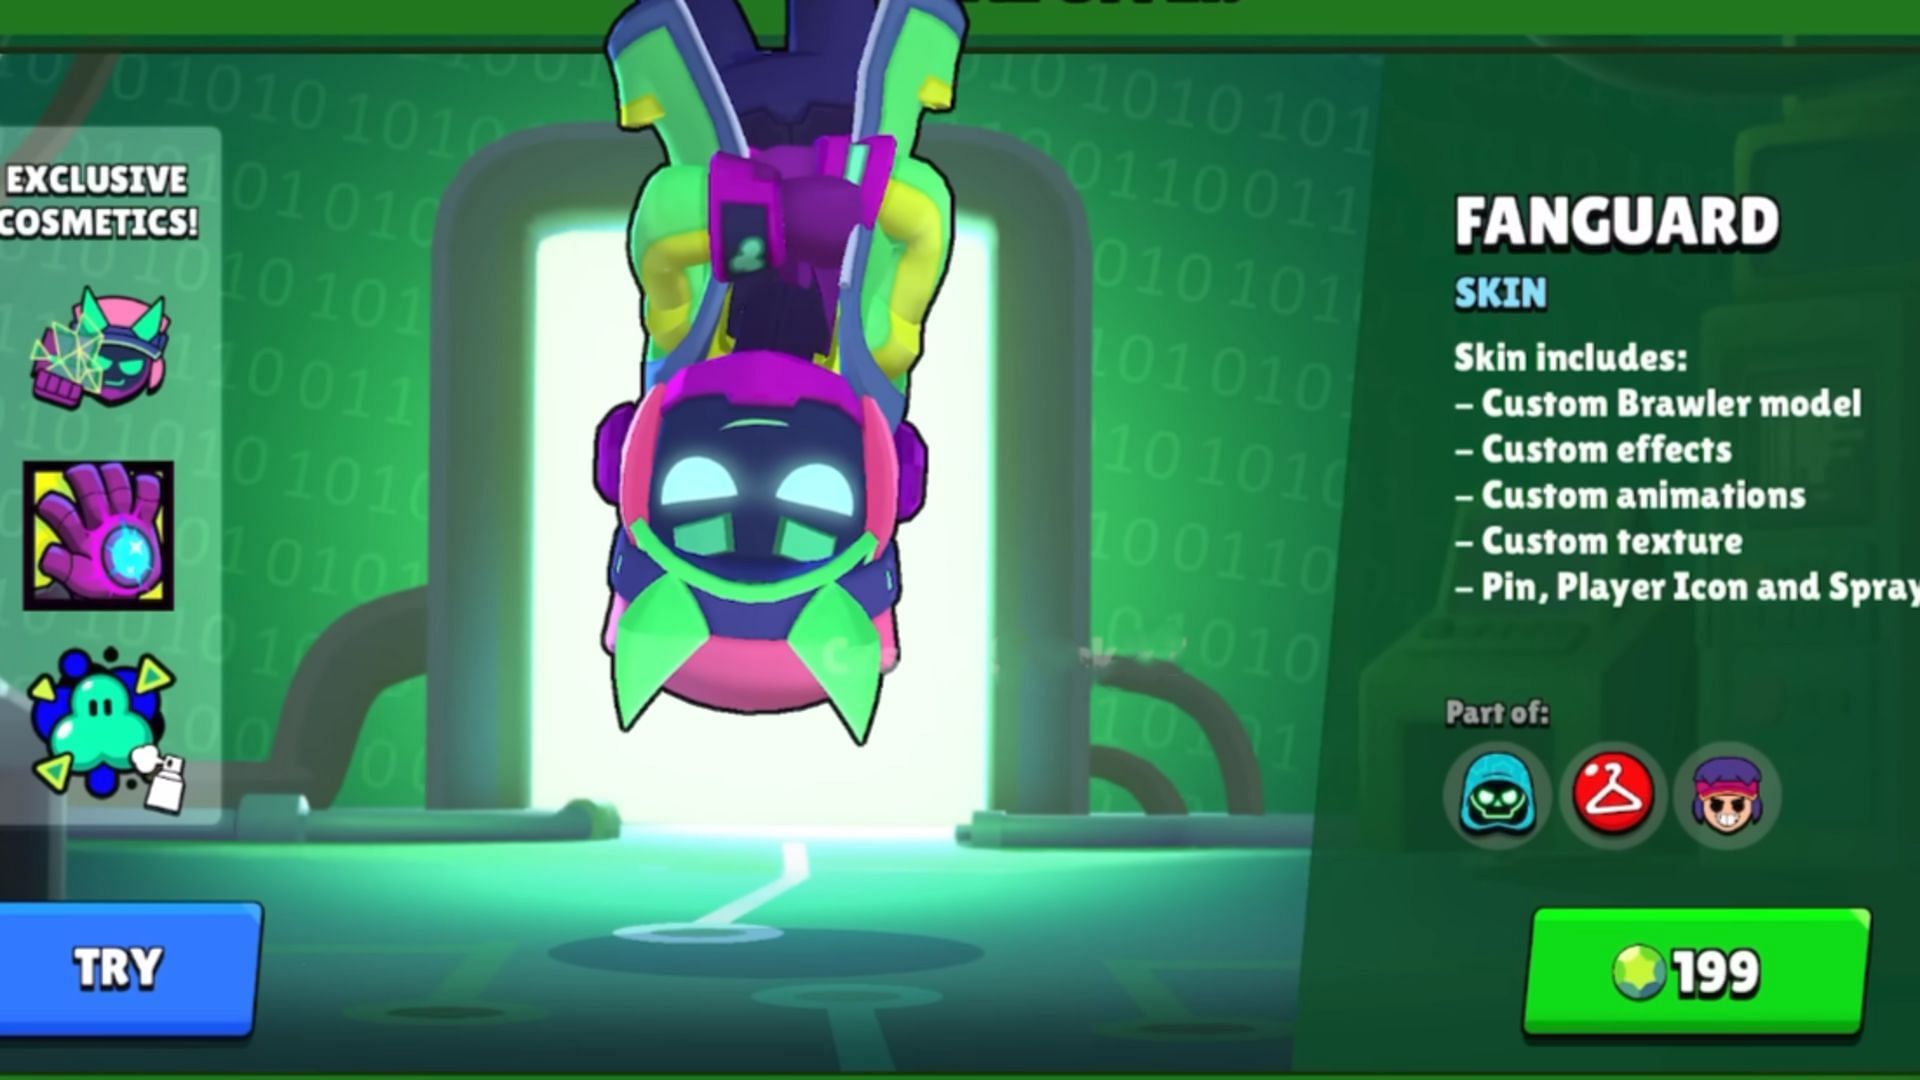 Required cost (Image via Cosmic Shock/YouTube || Supercell)